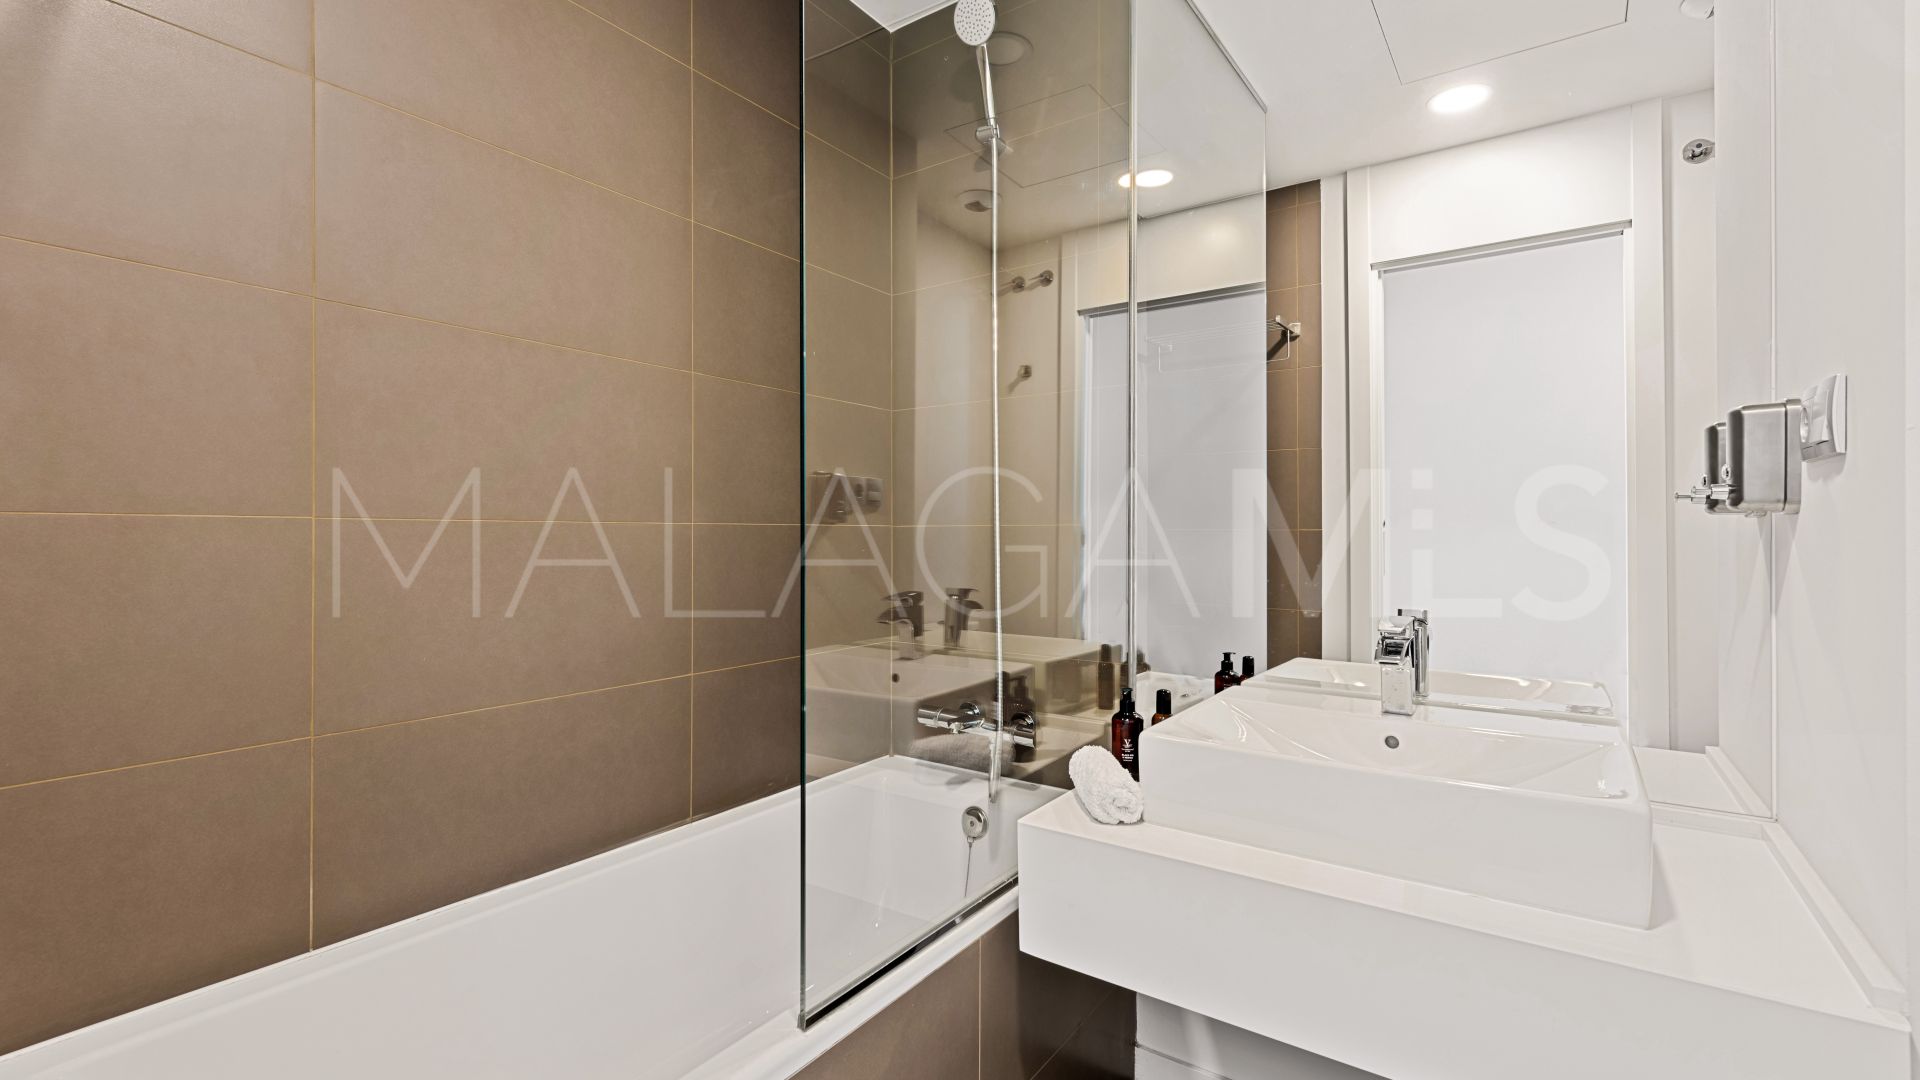 2 bedrooms New Golden Mile penthouse for sale